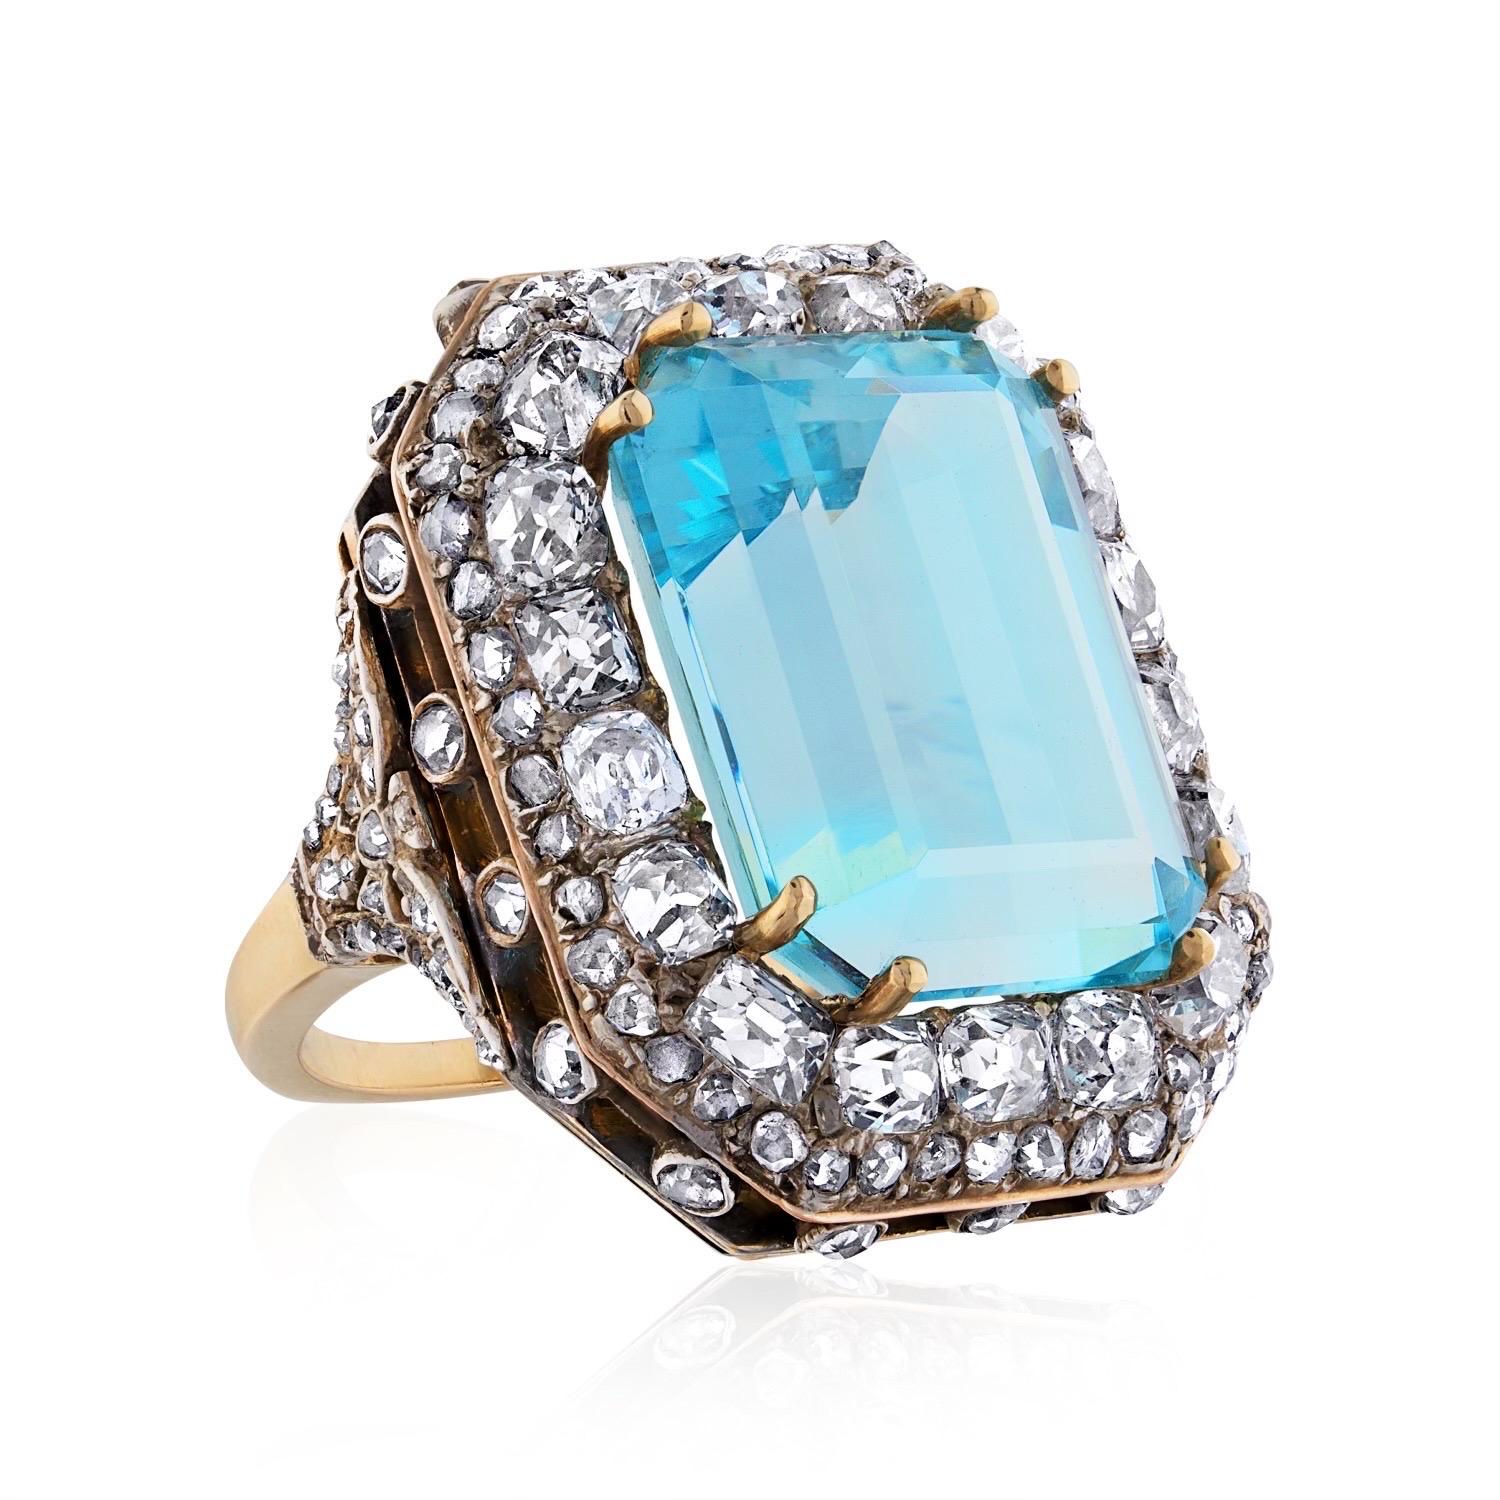 Mindi Mond's Reconceived Rings have a large celebrity following because of their finely curated original pieces of the era mixed with bold gemstones, creating a unique modern look. This ring is absolutely stunning, it will definitely make a